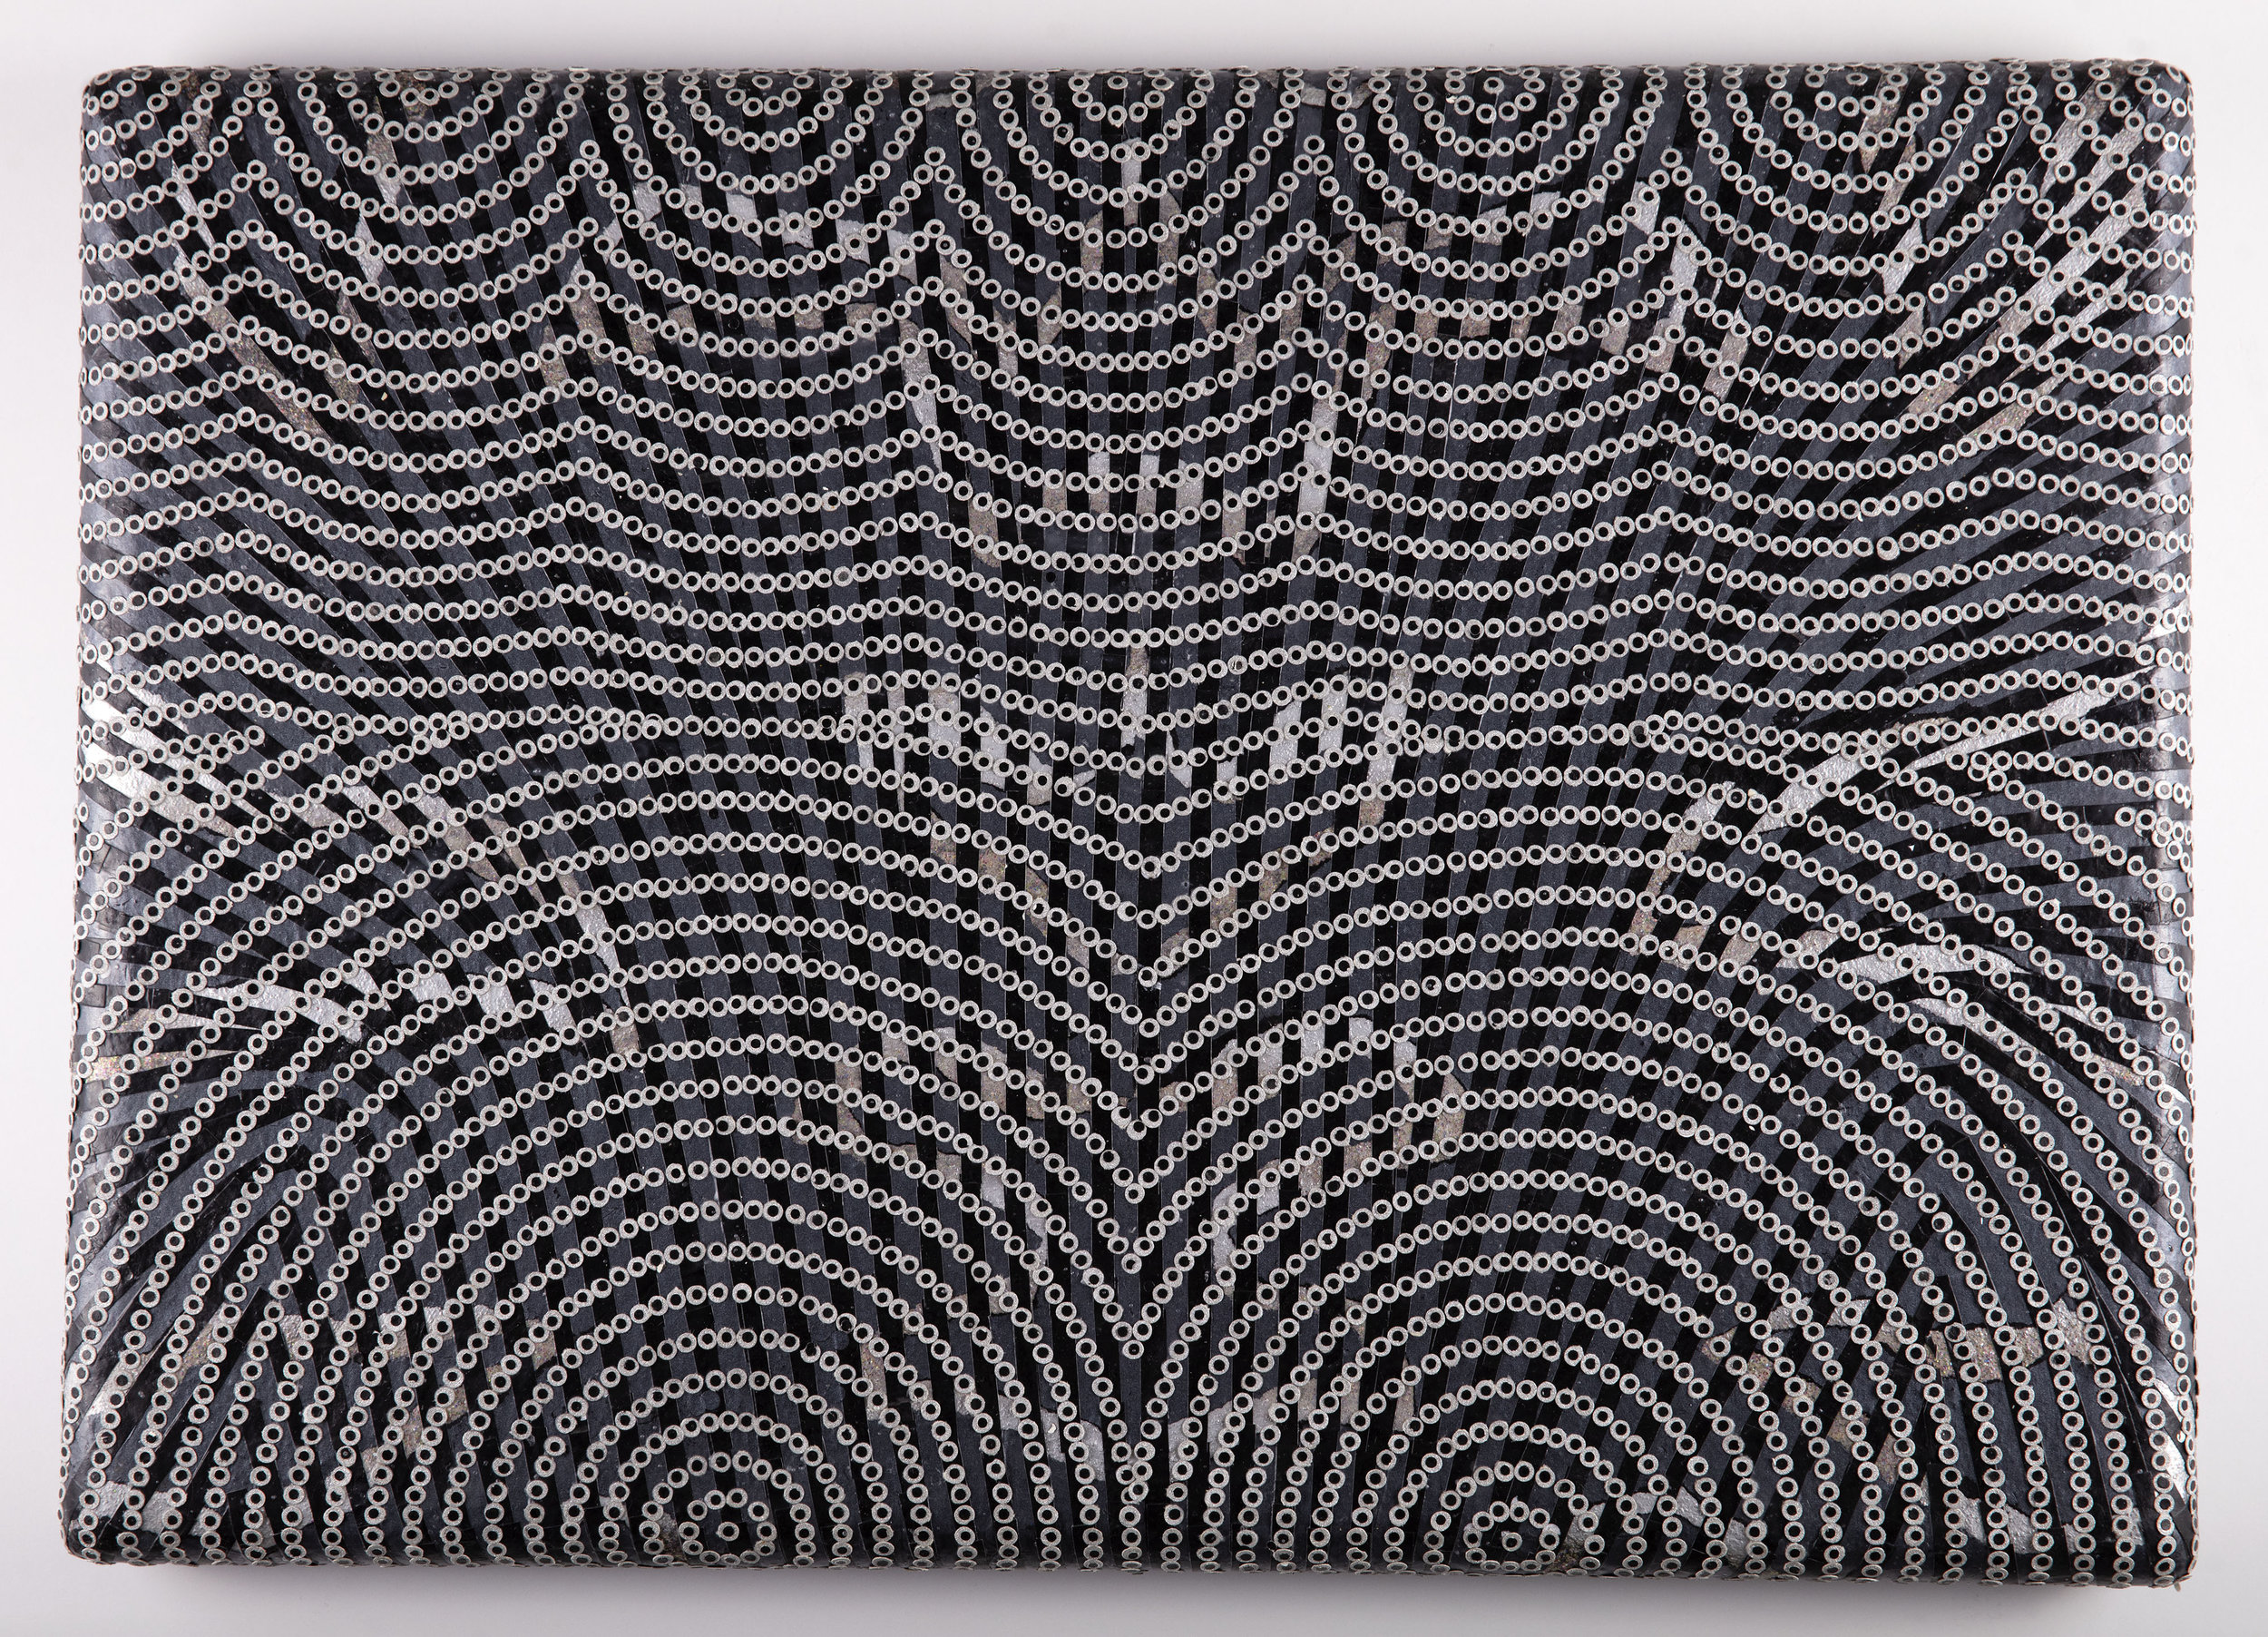   Black Veil, 2019   Acrylic, embossed metallic paper, and cut painted paper on canvas over shaped panel, 18.5 x 25.5 inches 